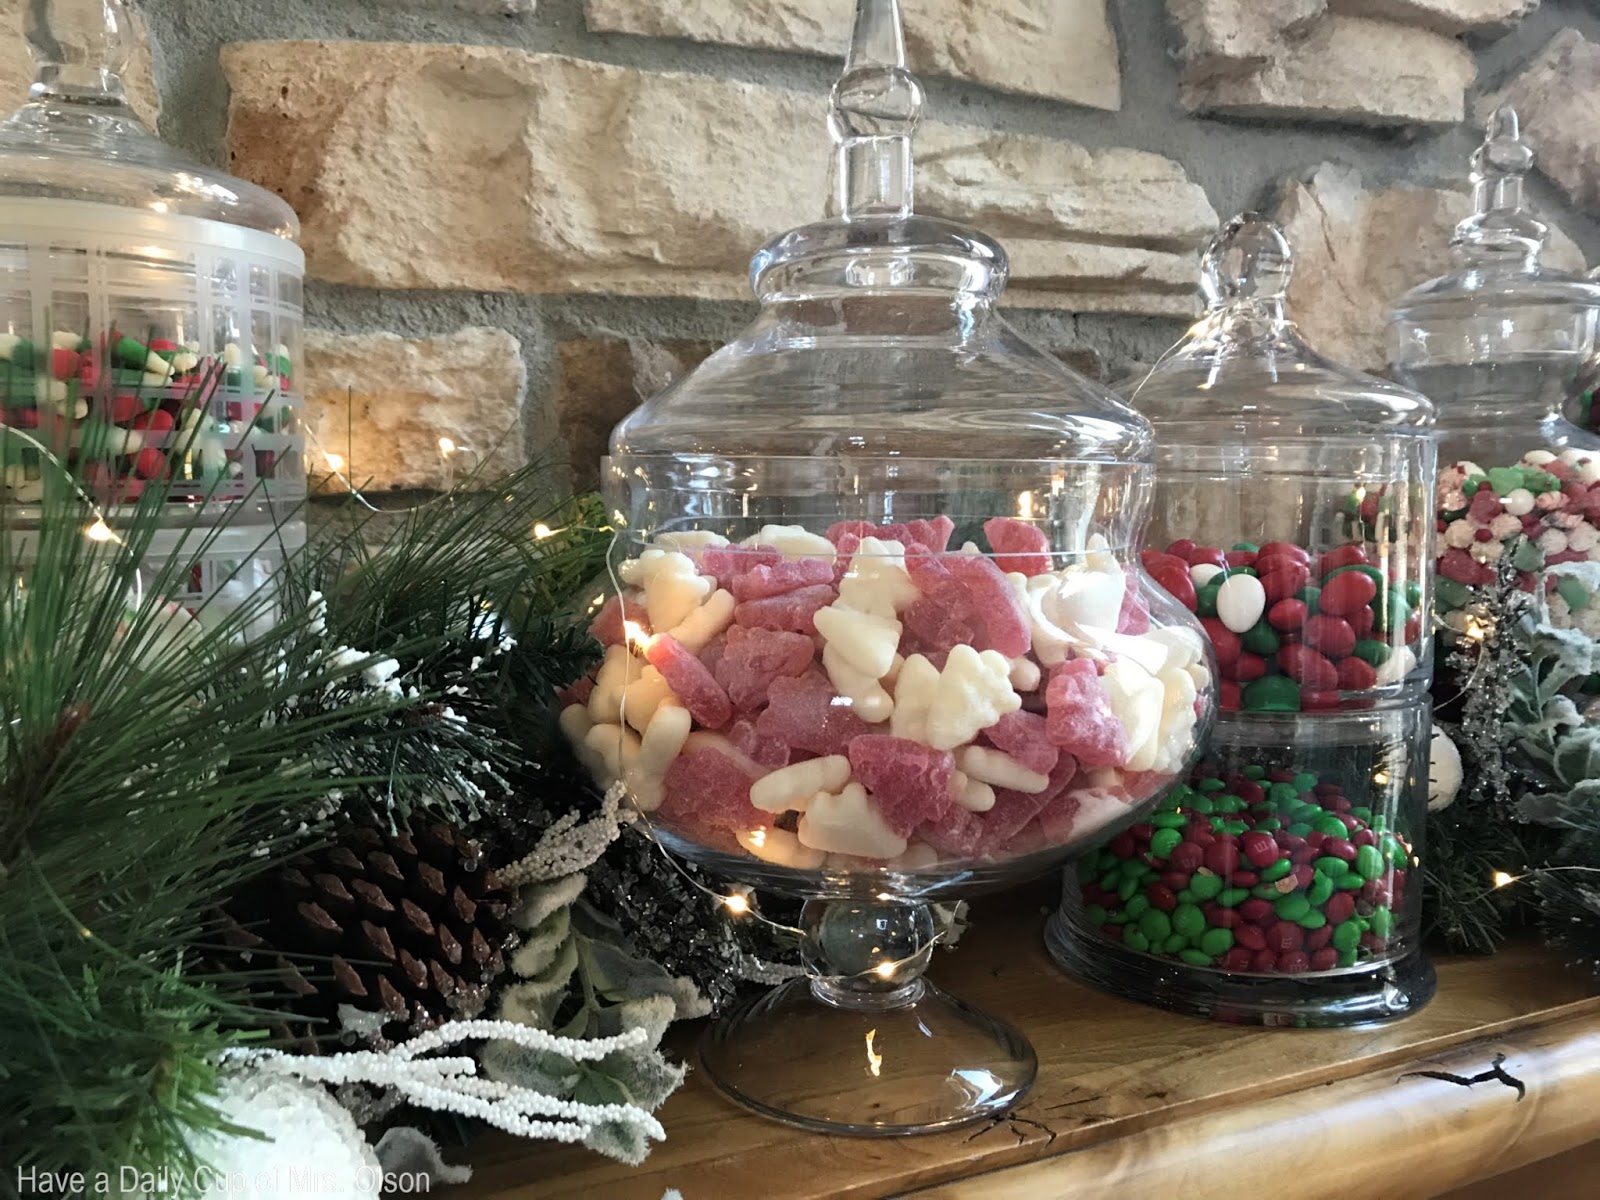 Sweet Christmas Snippets Mantle - Have a Daily Cup of Mrs. Olson